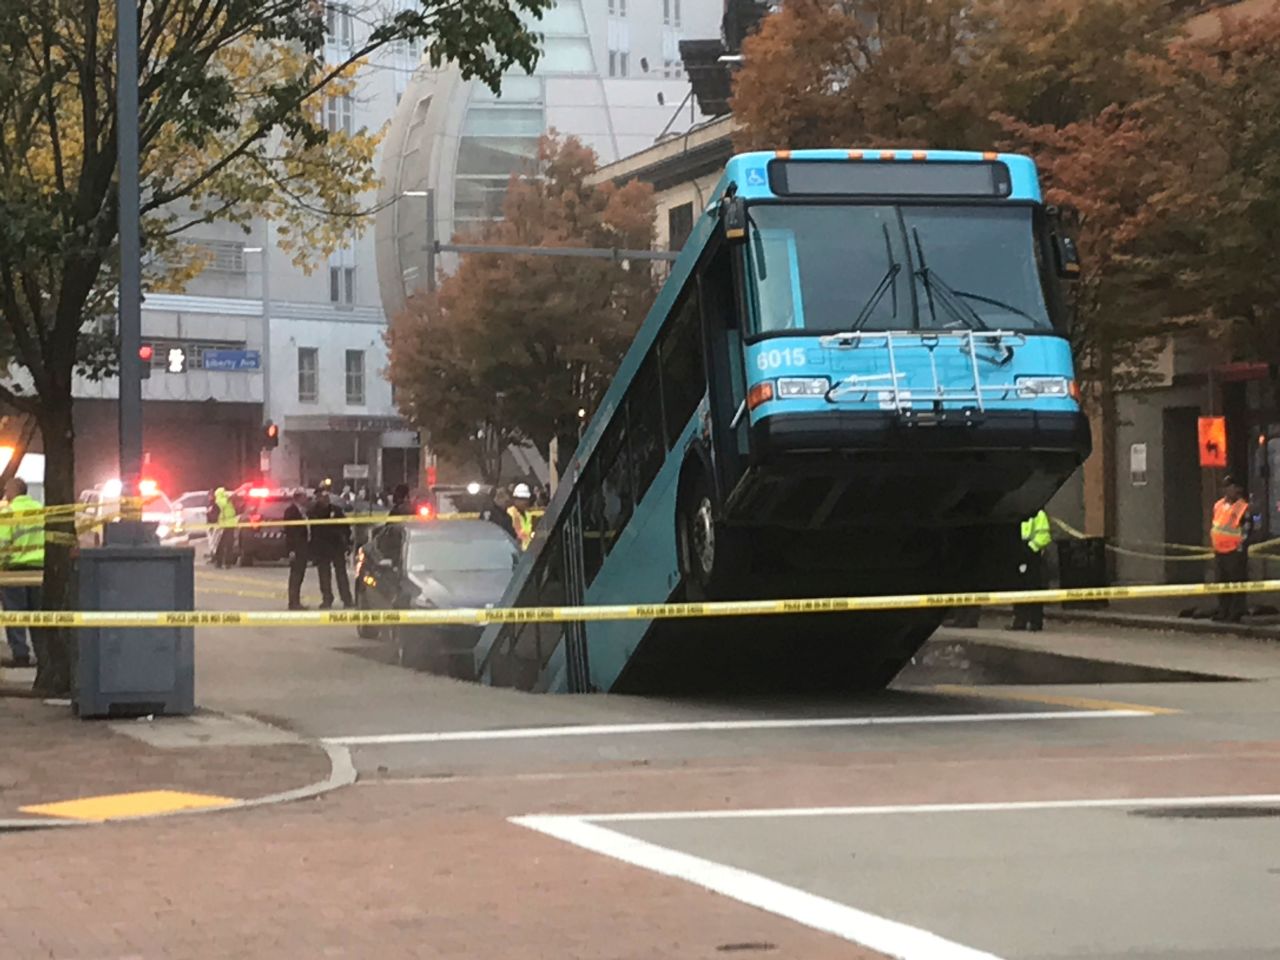 A bus <a href="https://www.cnn.com/2019/10/28/us/bus-sinkhole-pittsburgh-trnd/index.html" target="_blank">fell into a sinkhole</a> in Pittsburgh on Monday, October 28. The bus was stopped at a red light when the sinkhole opened up beneath it, officials said. Only the driver and one passenger were on board at the time. Both were able to safely exit.